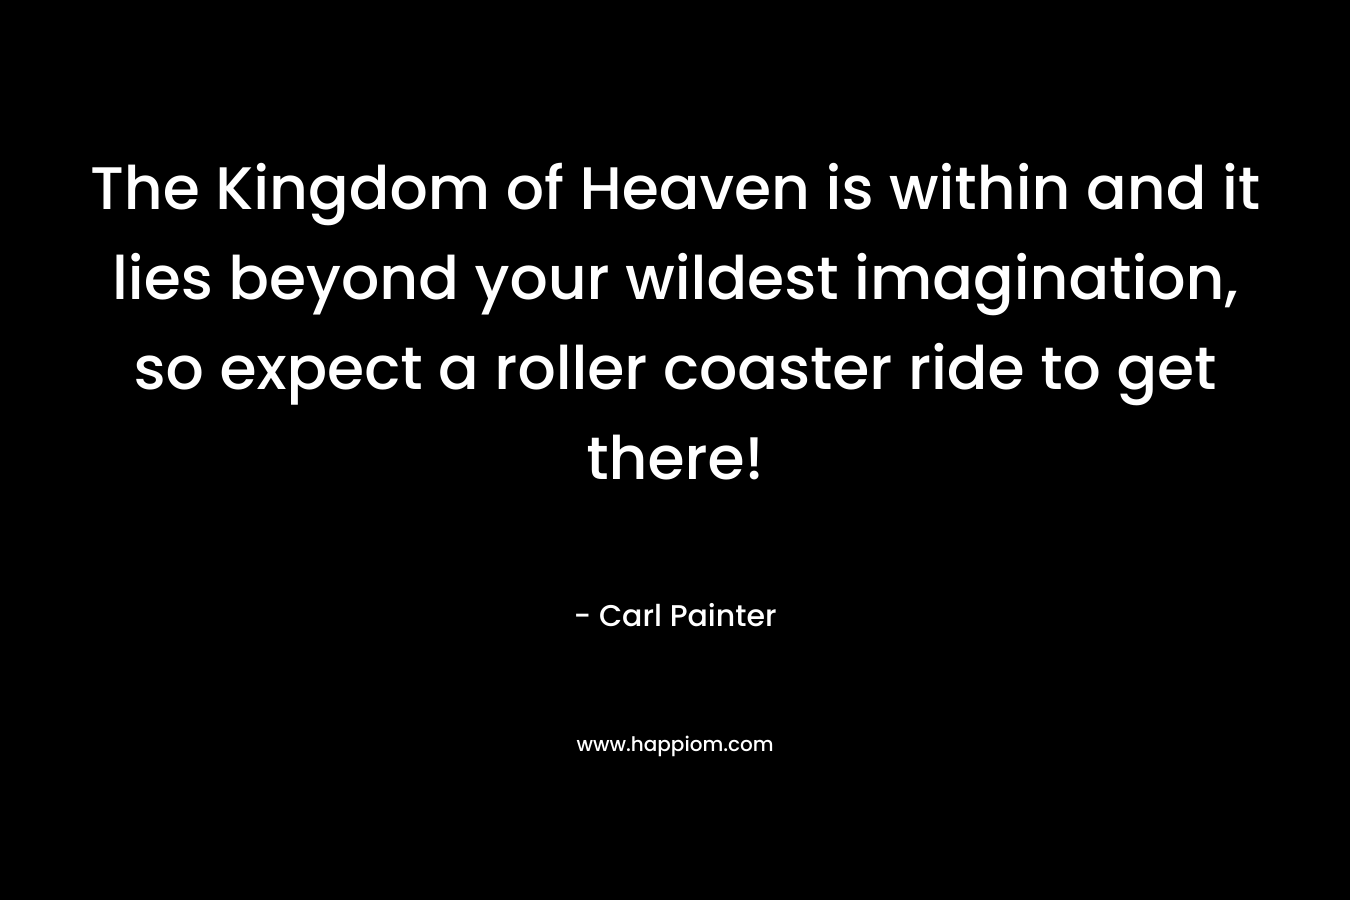 The Kingdom of Heaven is within and it lies beyond your wildest imagination, so expect a roller coaster ride to get there! – Carl Painter